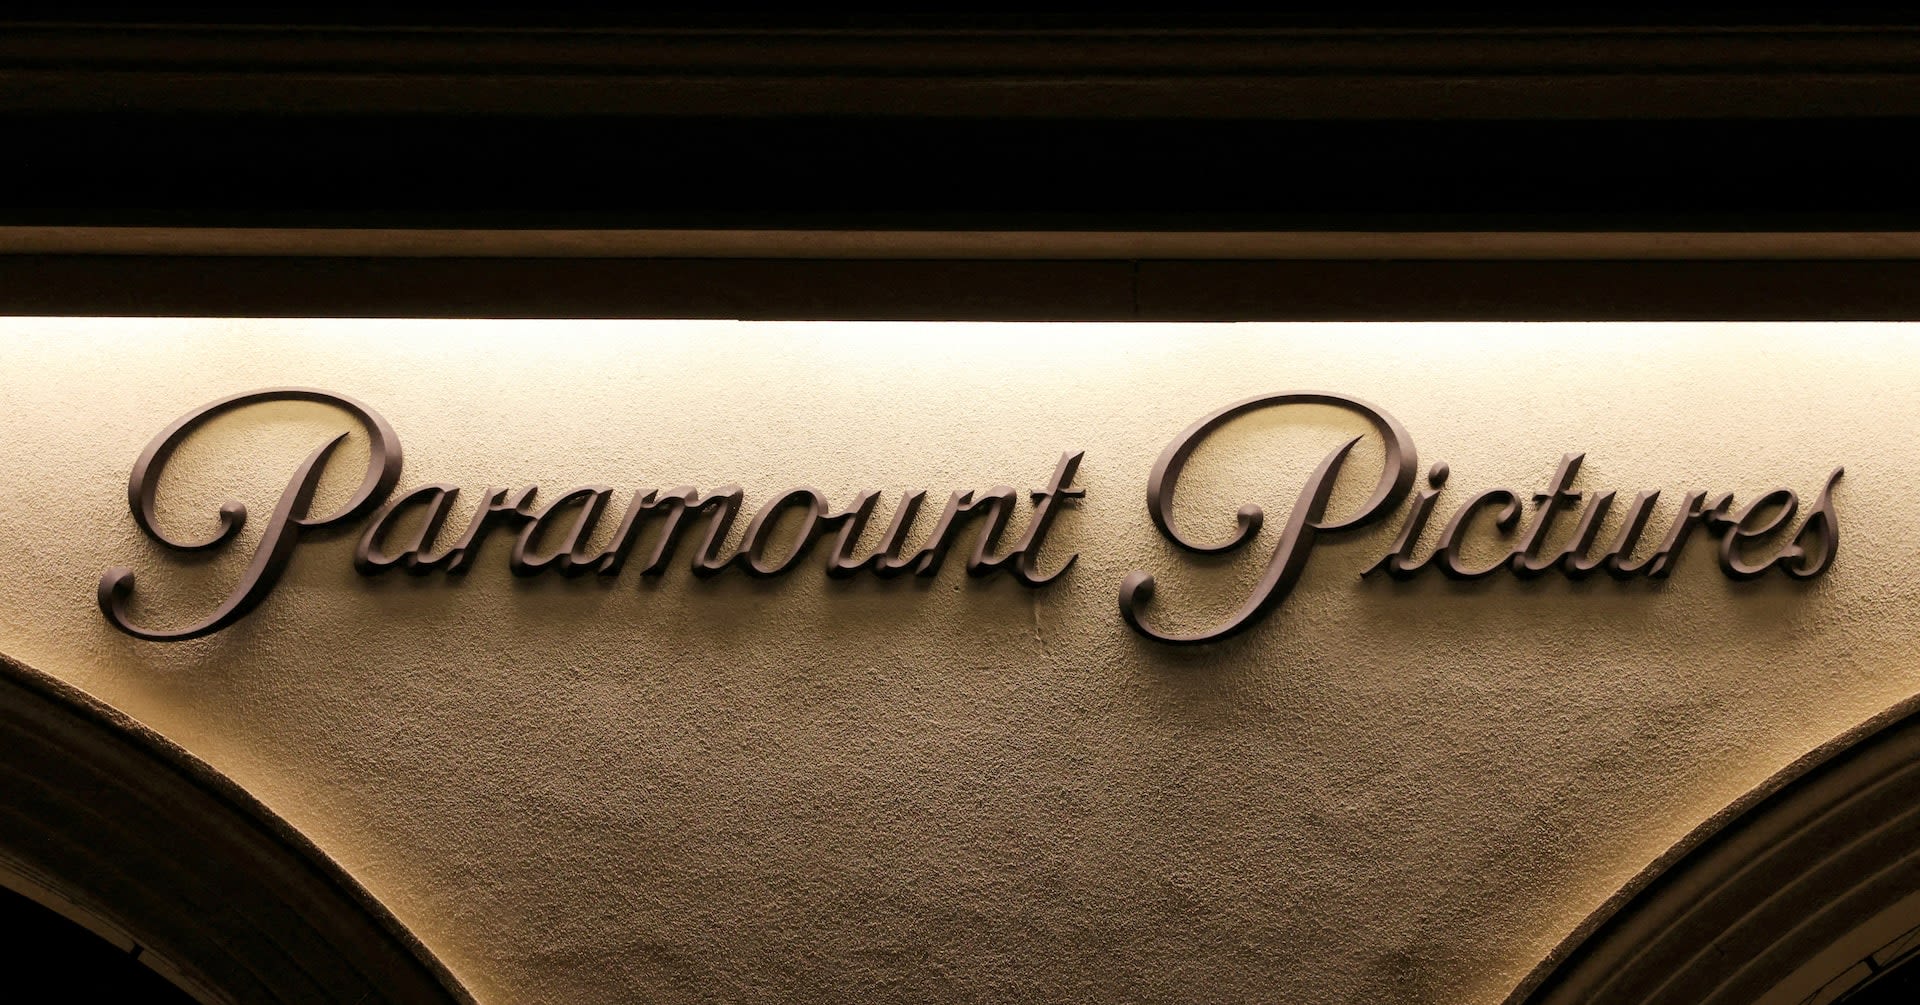 Paramount shares fall after CNBC reports Sony rethinking its bid